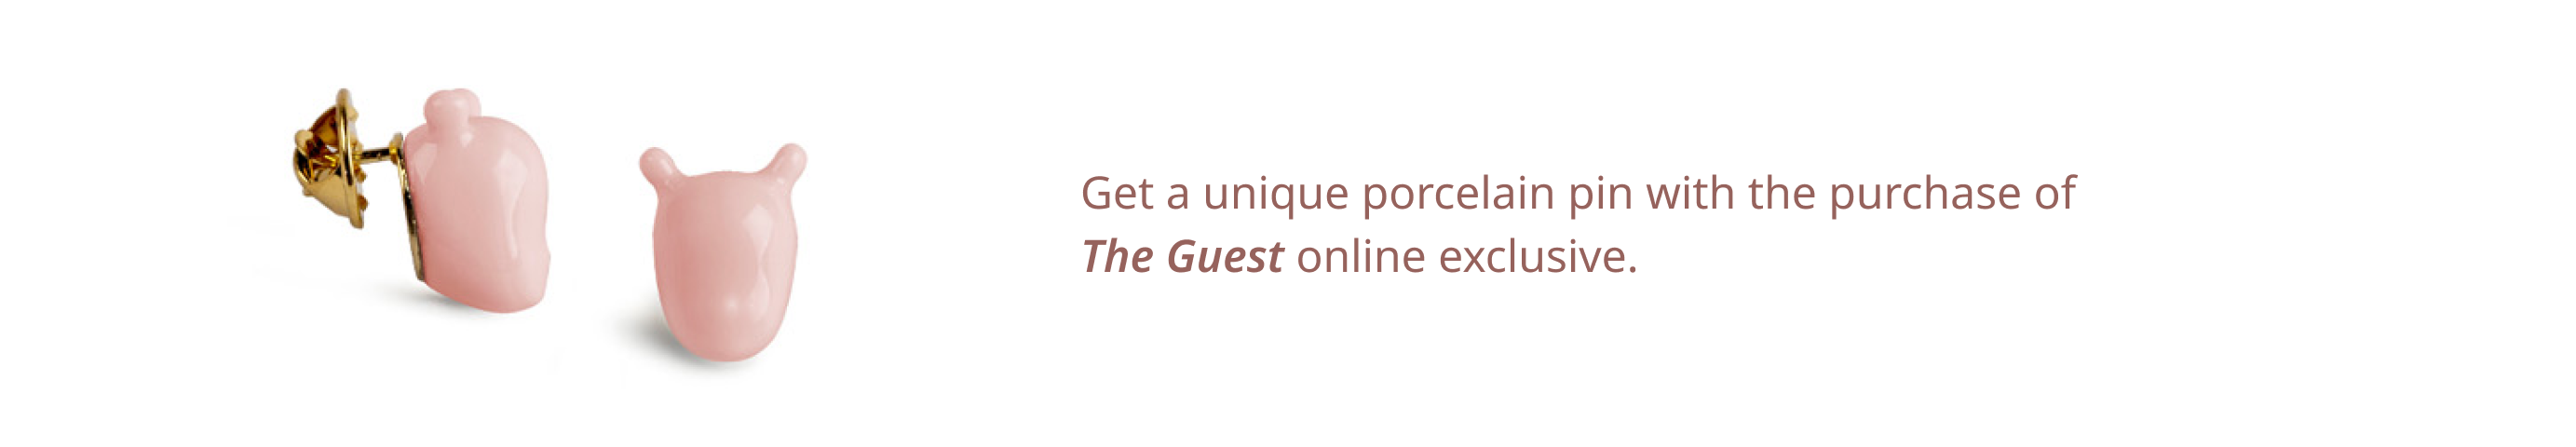 Get a unique porcelain pin with the purchase of The Guest online exclusive.